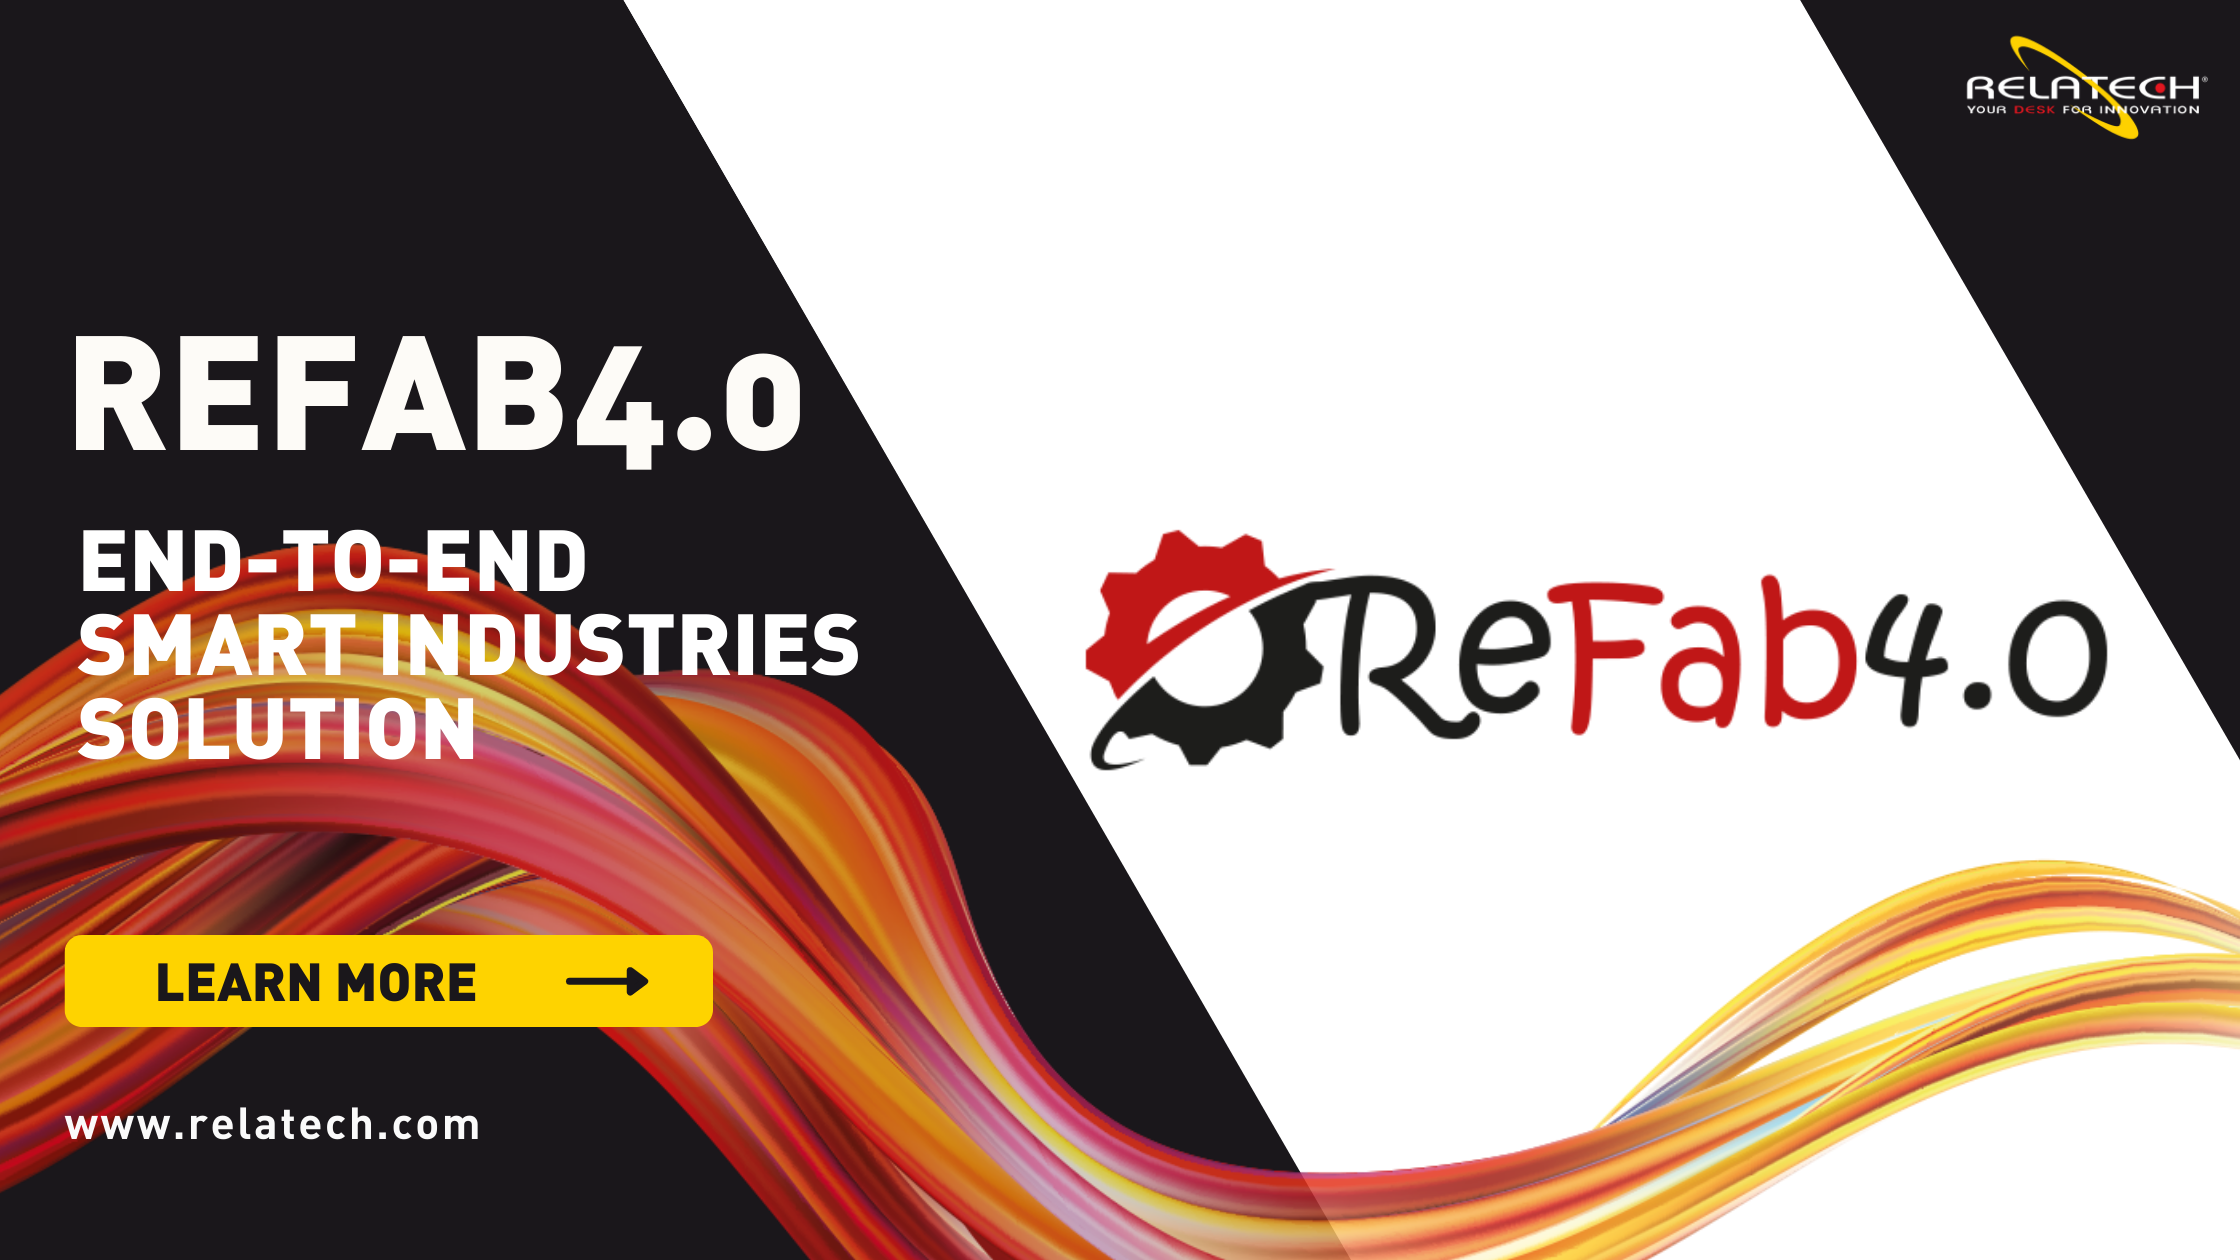 ReFab4.0: End-to-End Smart Industries solutions